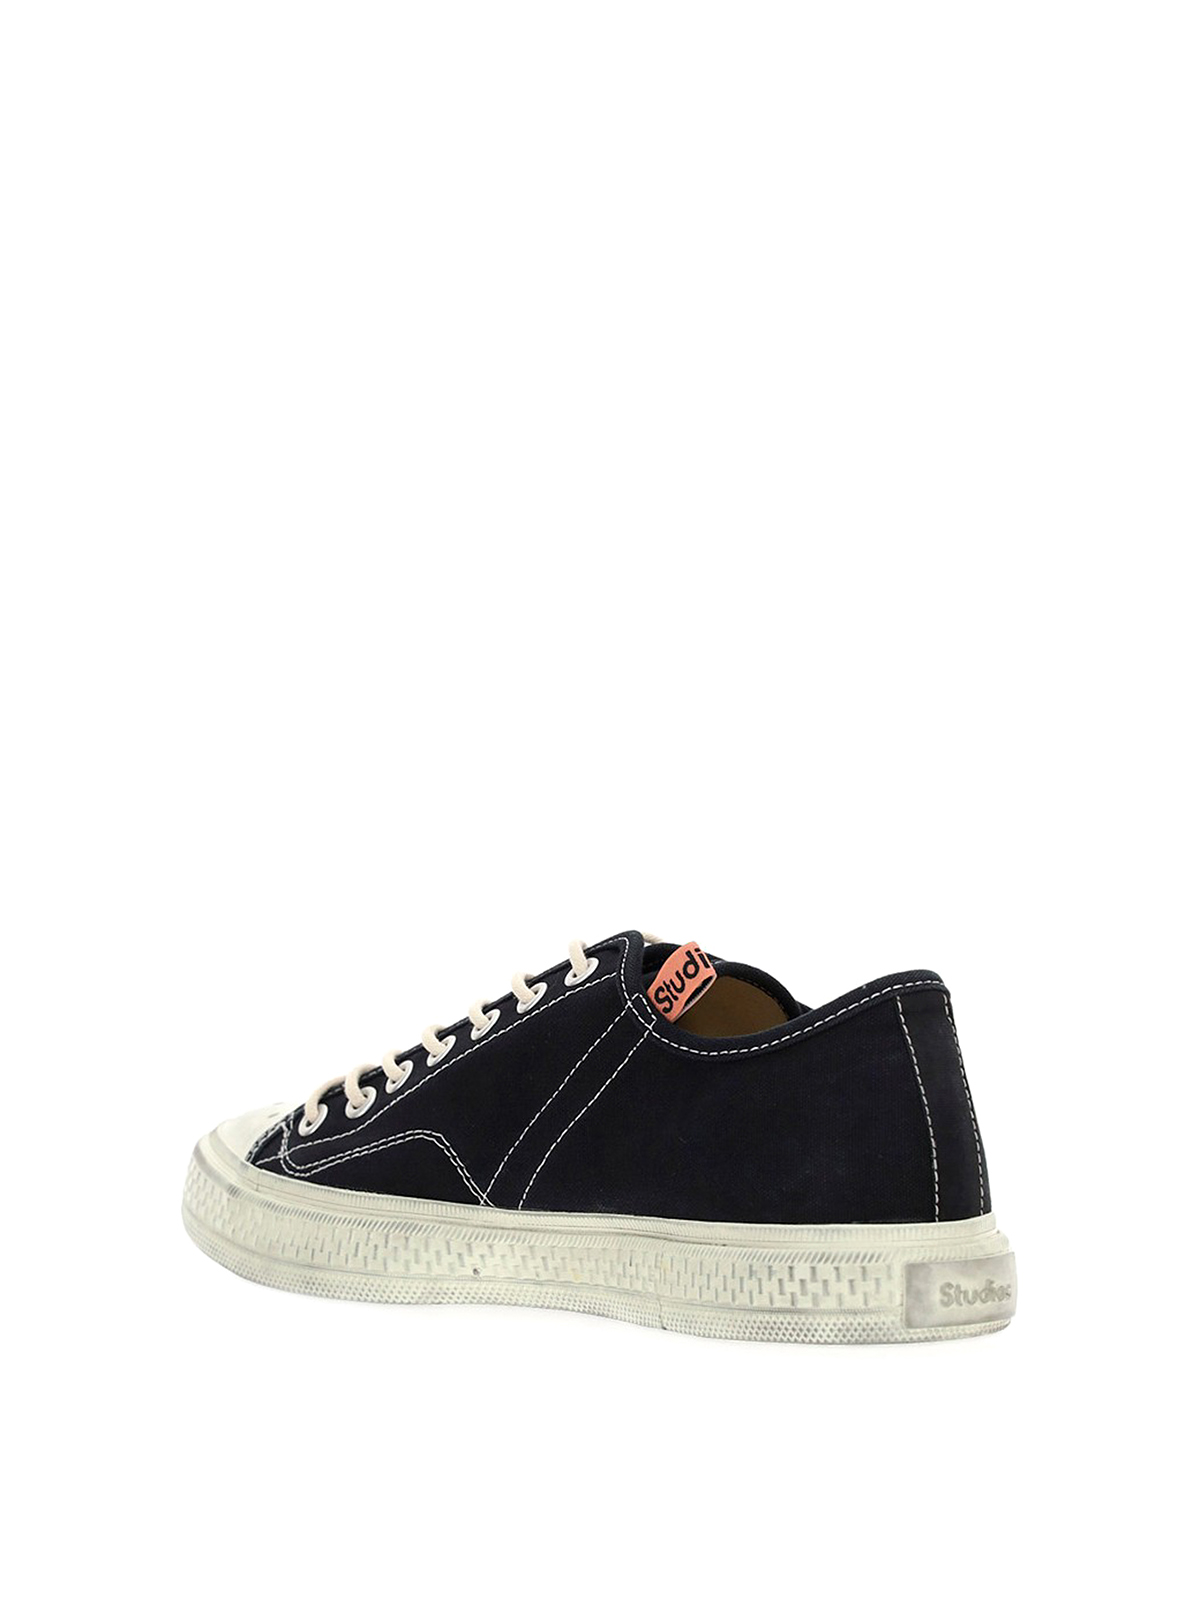 Trainers Acne Studios - Ballow sneakers - BD0153CGL | Shop online at iKRIX